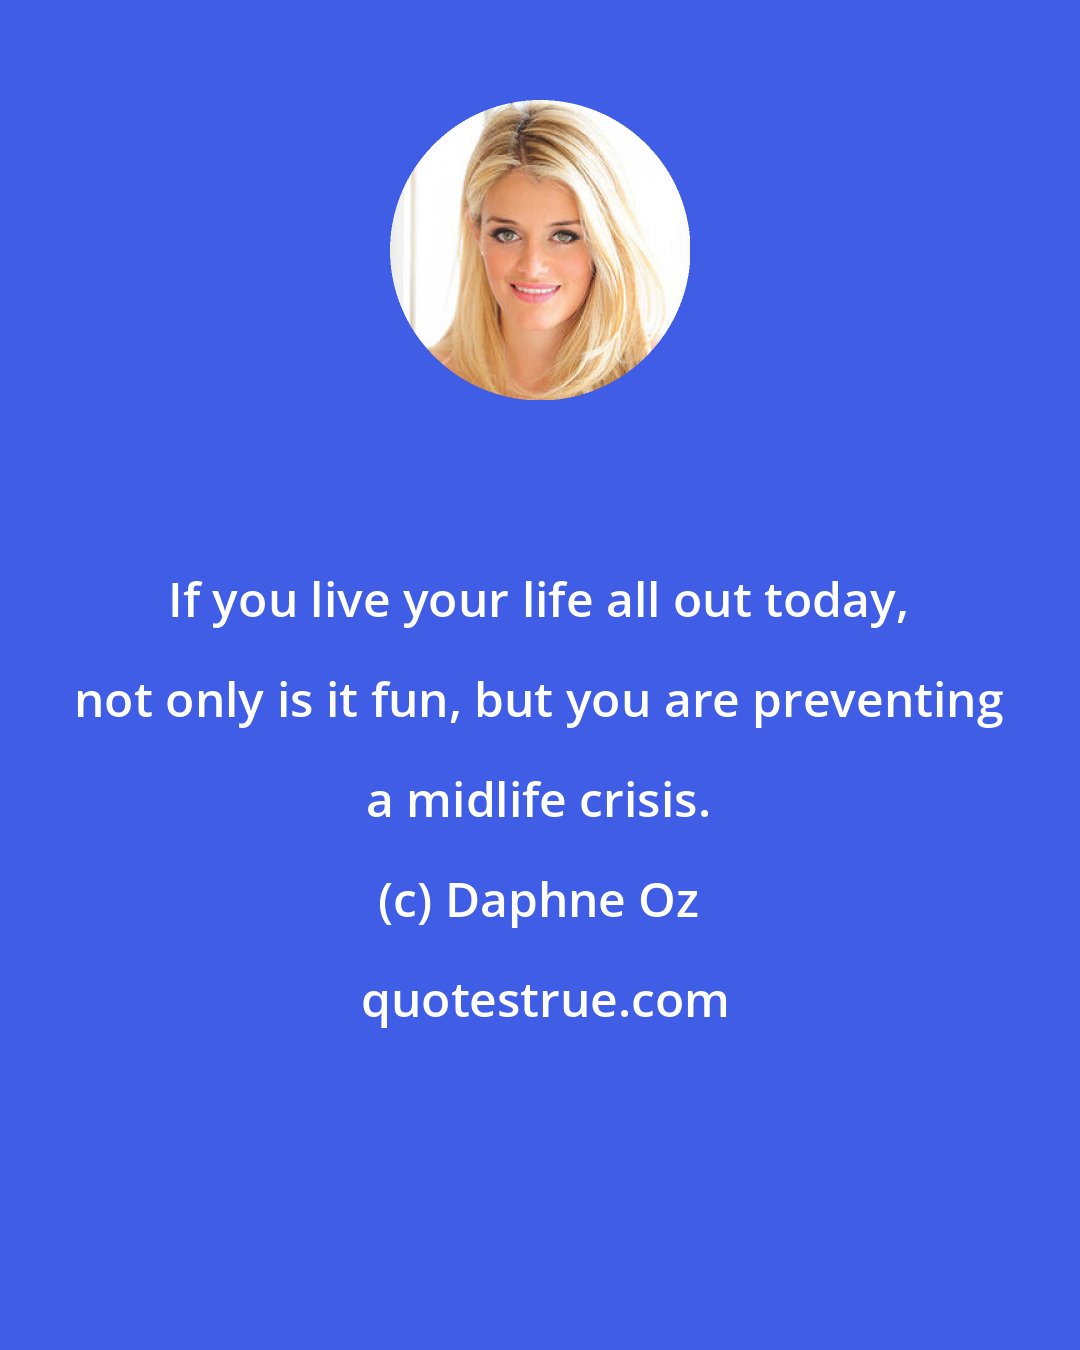 Daphne Oz: If you live your life all out today, not only is it fun, but you are preventing a midlife crisis.